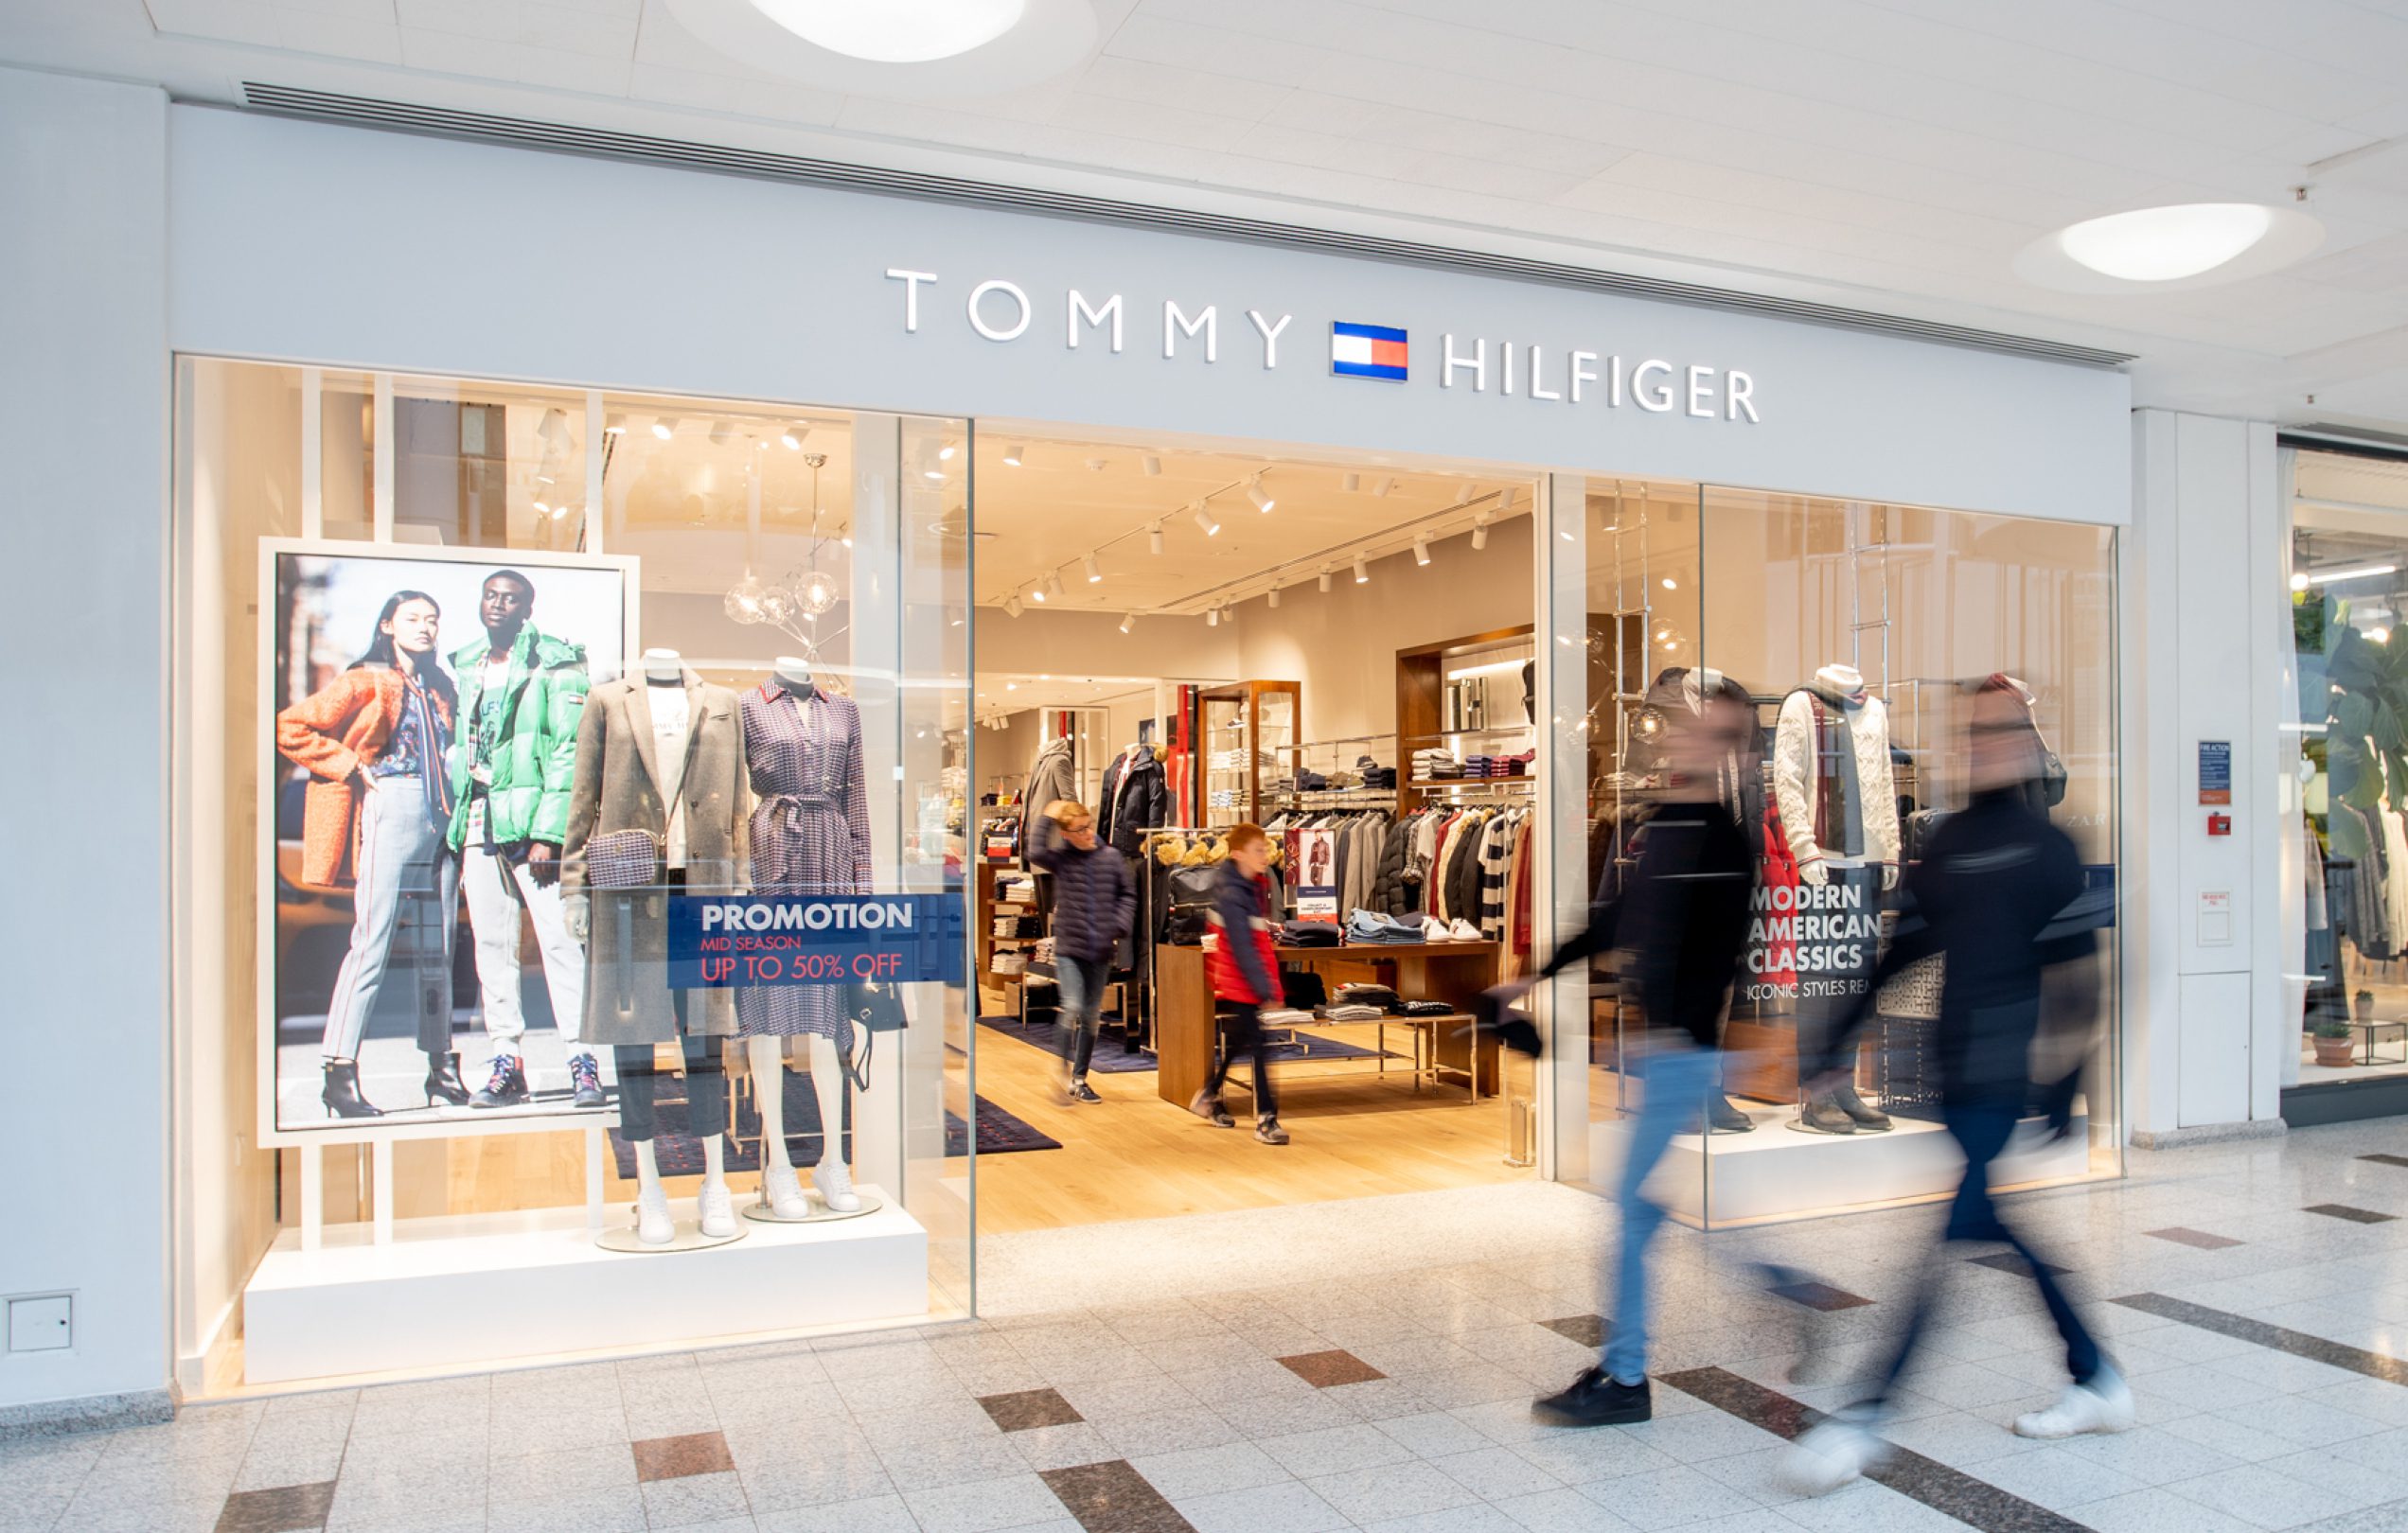 TOMMY HILFIGER FACTORY OUTLET SHOPPING